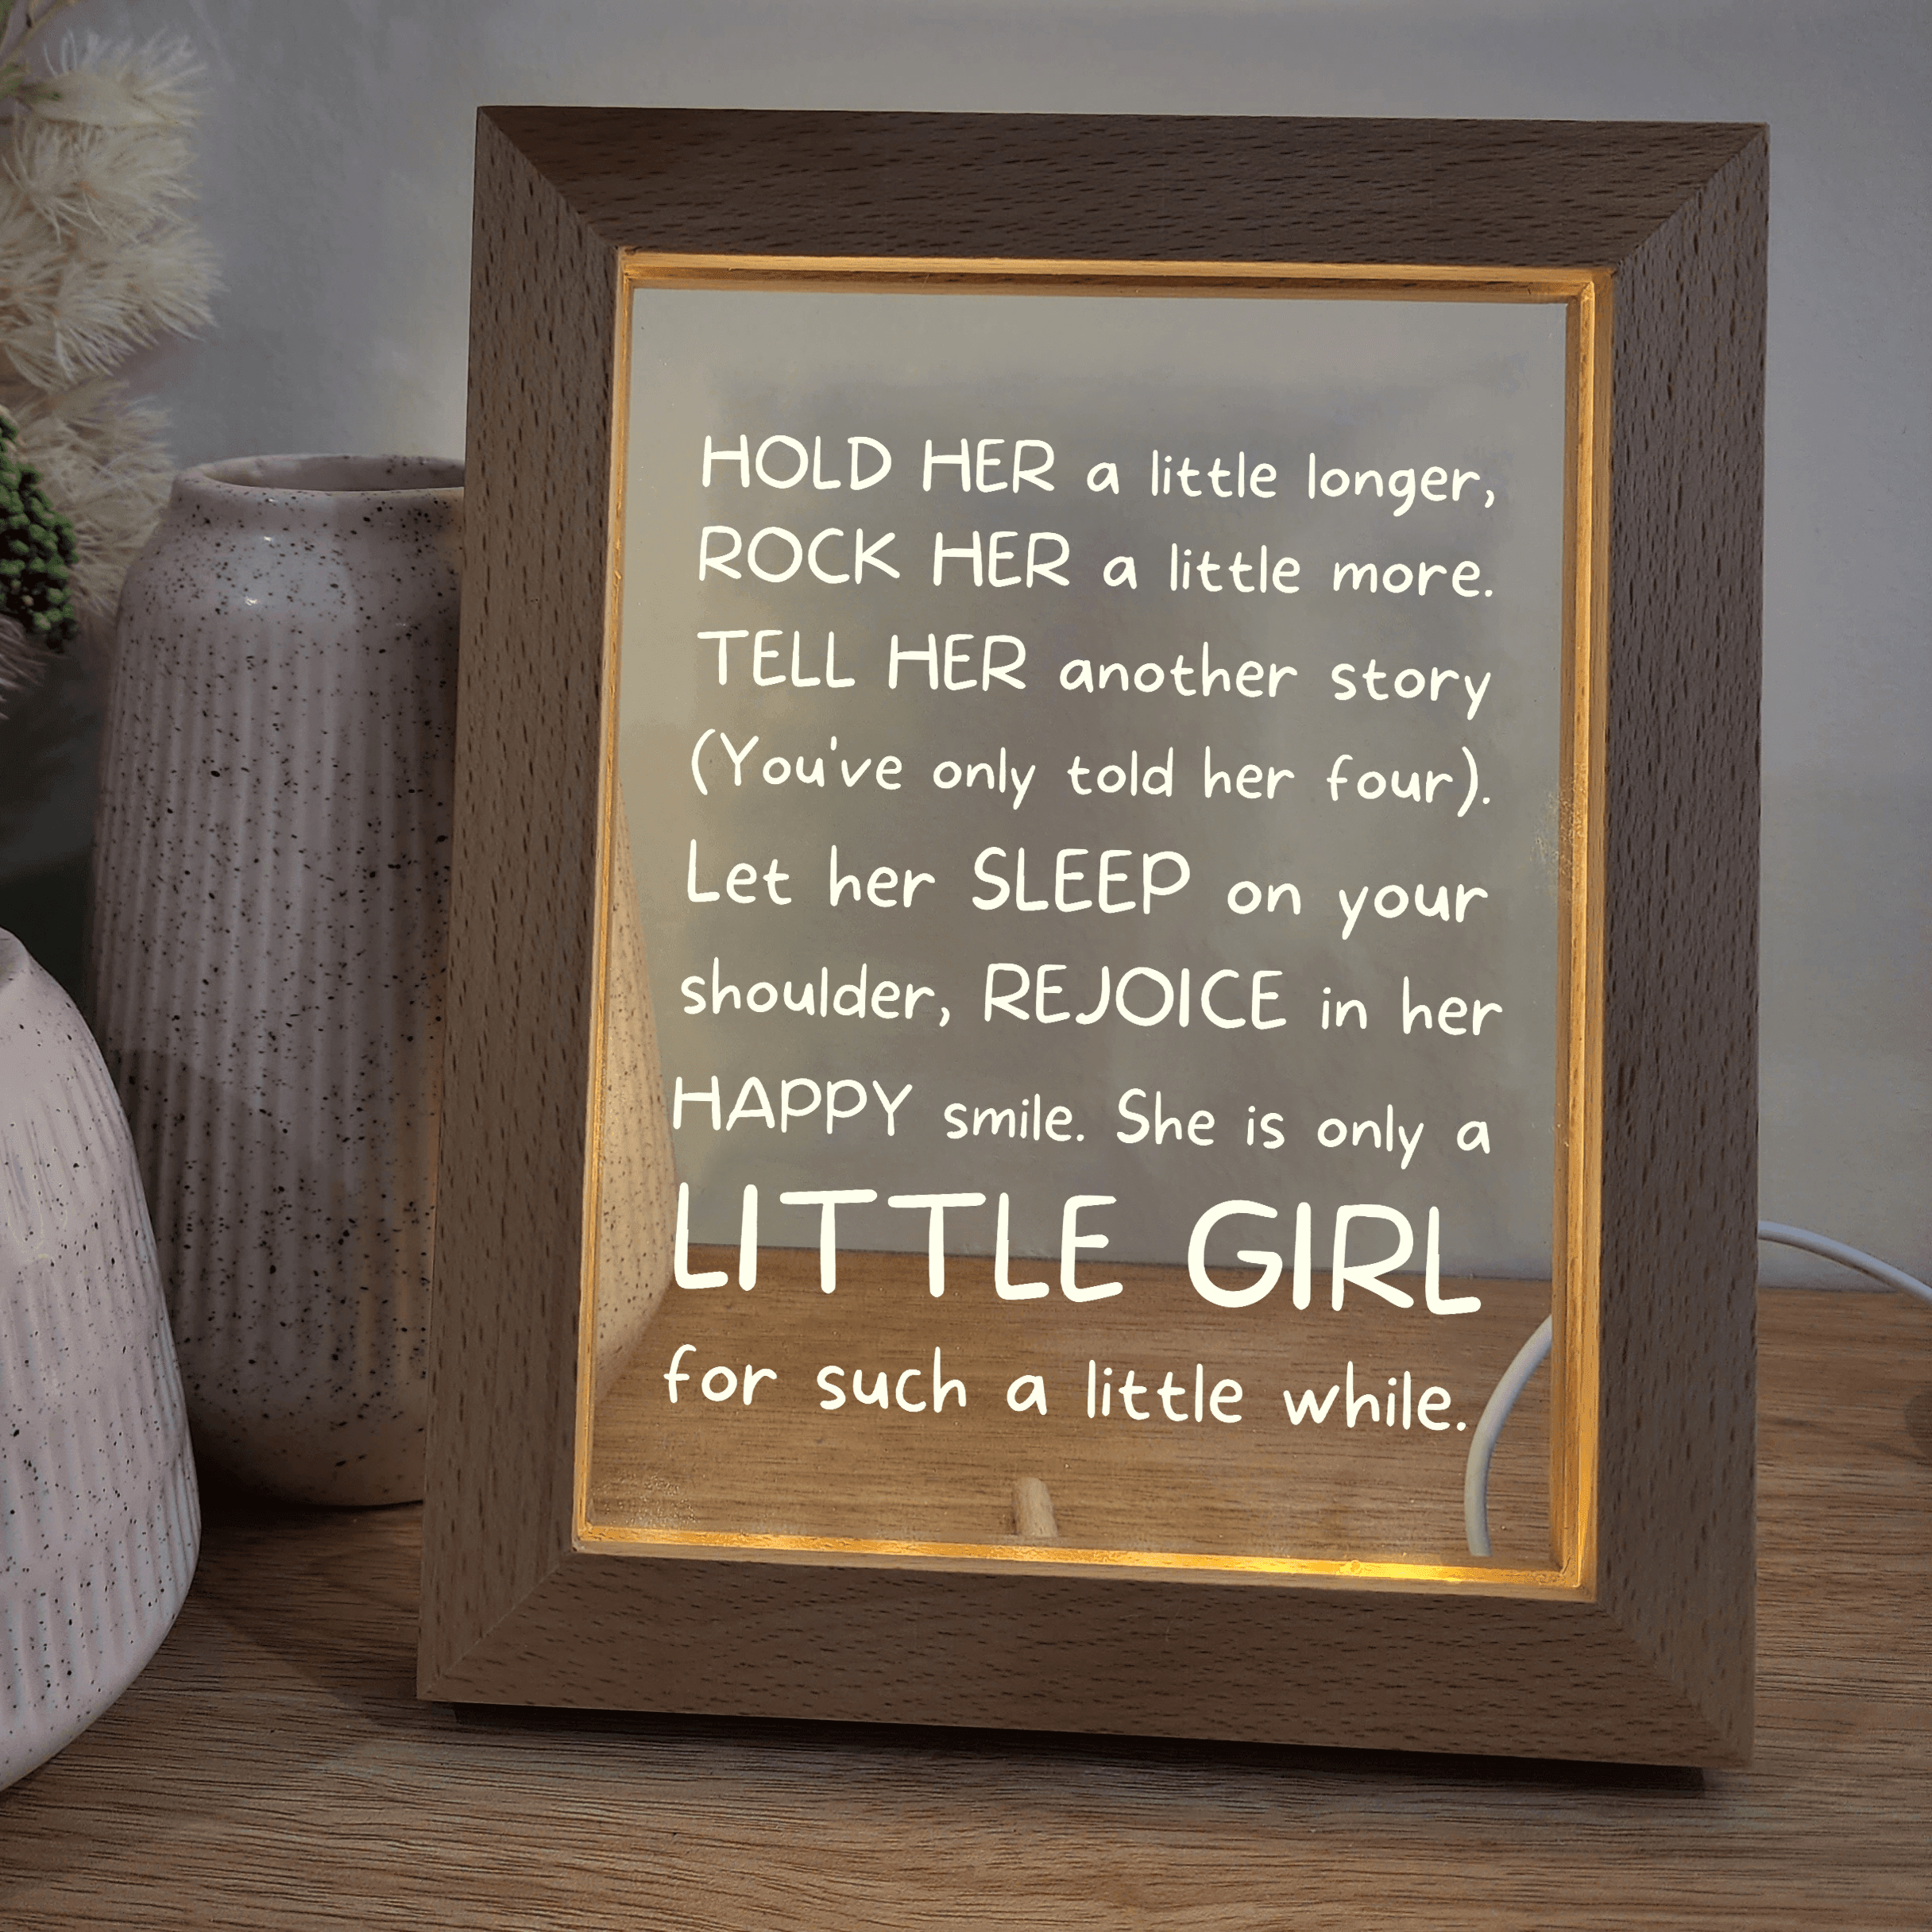 Timber Night Light Frame 🌙 - Quote - Hold Her a Little Longer - The Willow Corner